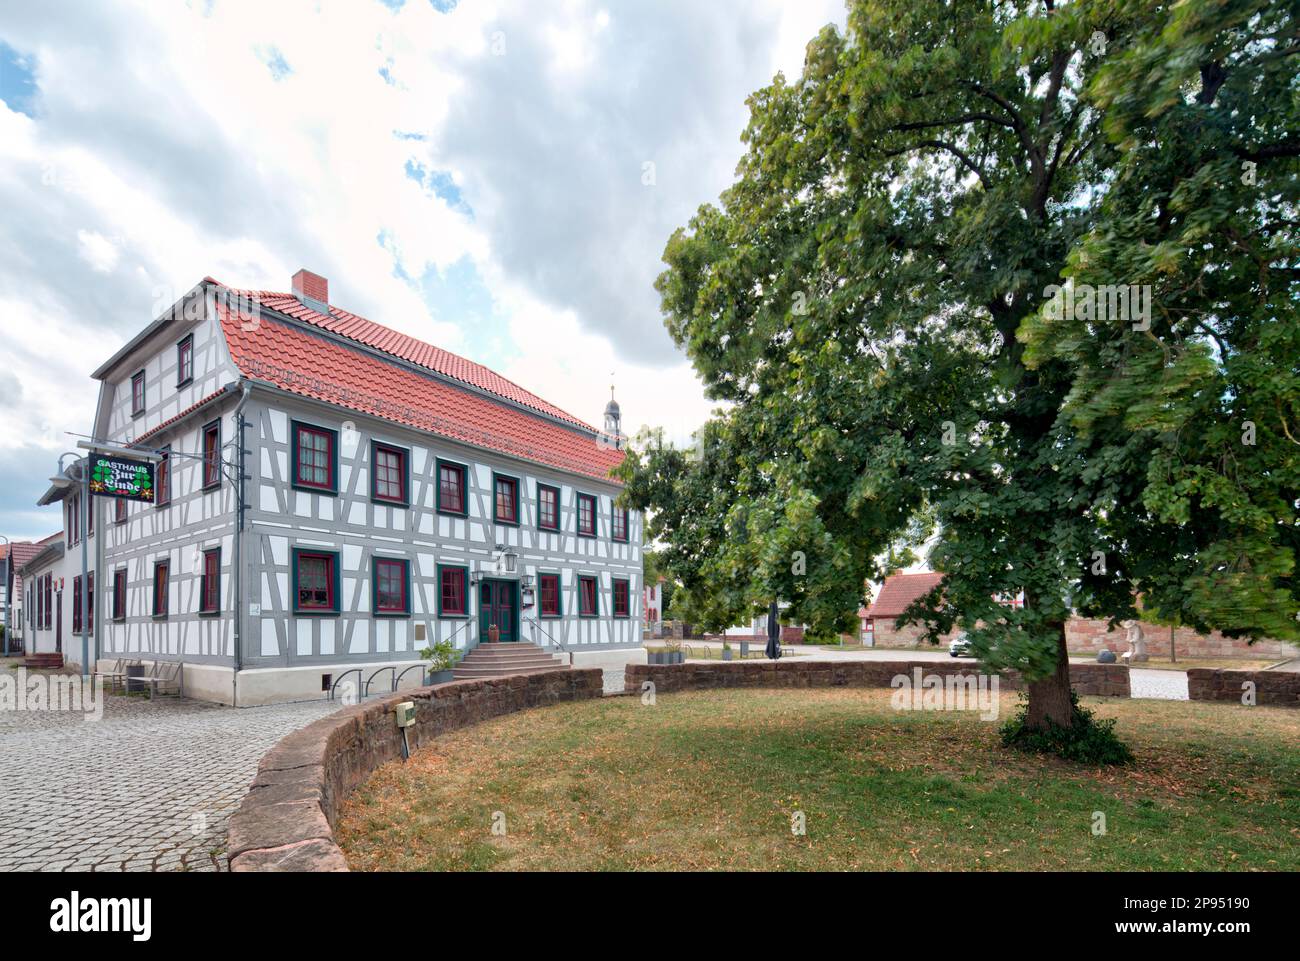 Inn, Zur Linde, half-timbered house, house facade, half-timbering, historical, Breitungen, Werra, Thuringia, Germany, Stock Photo